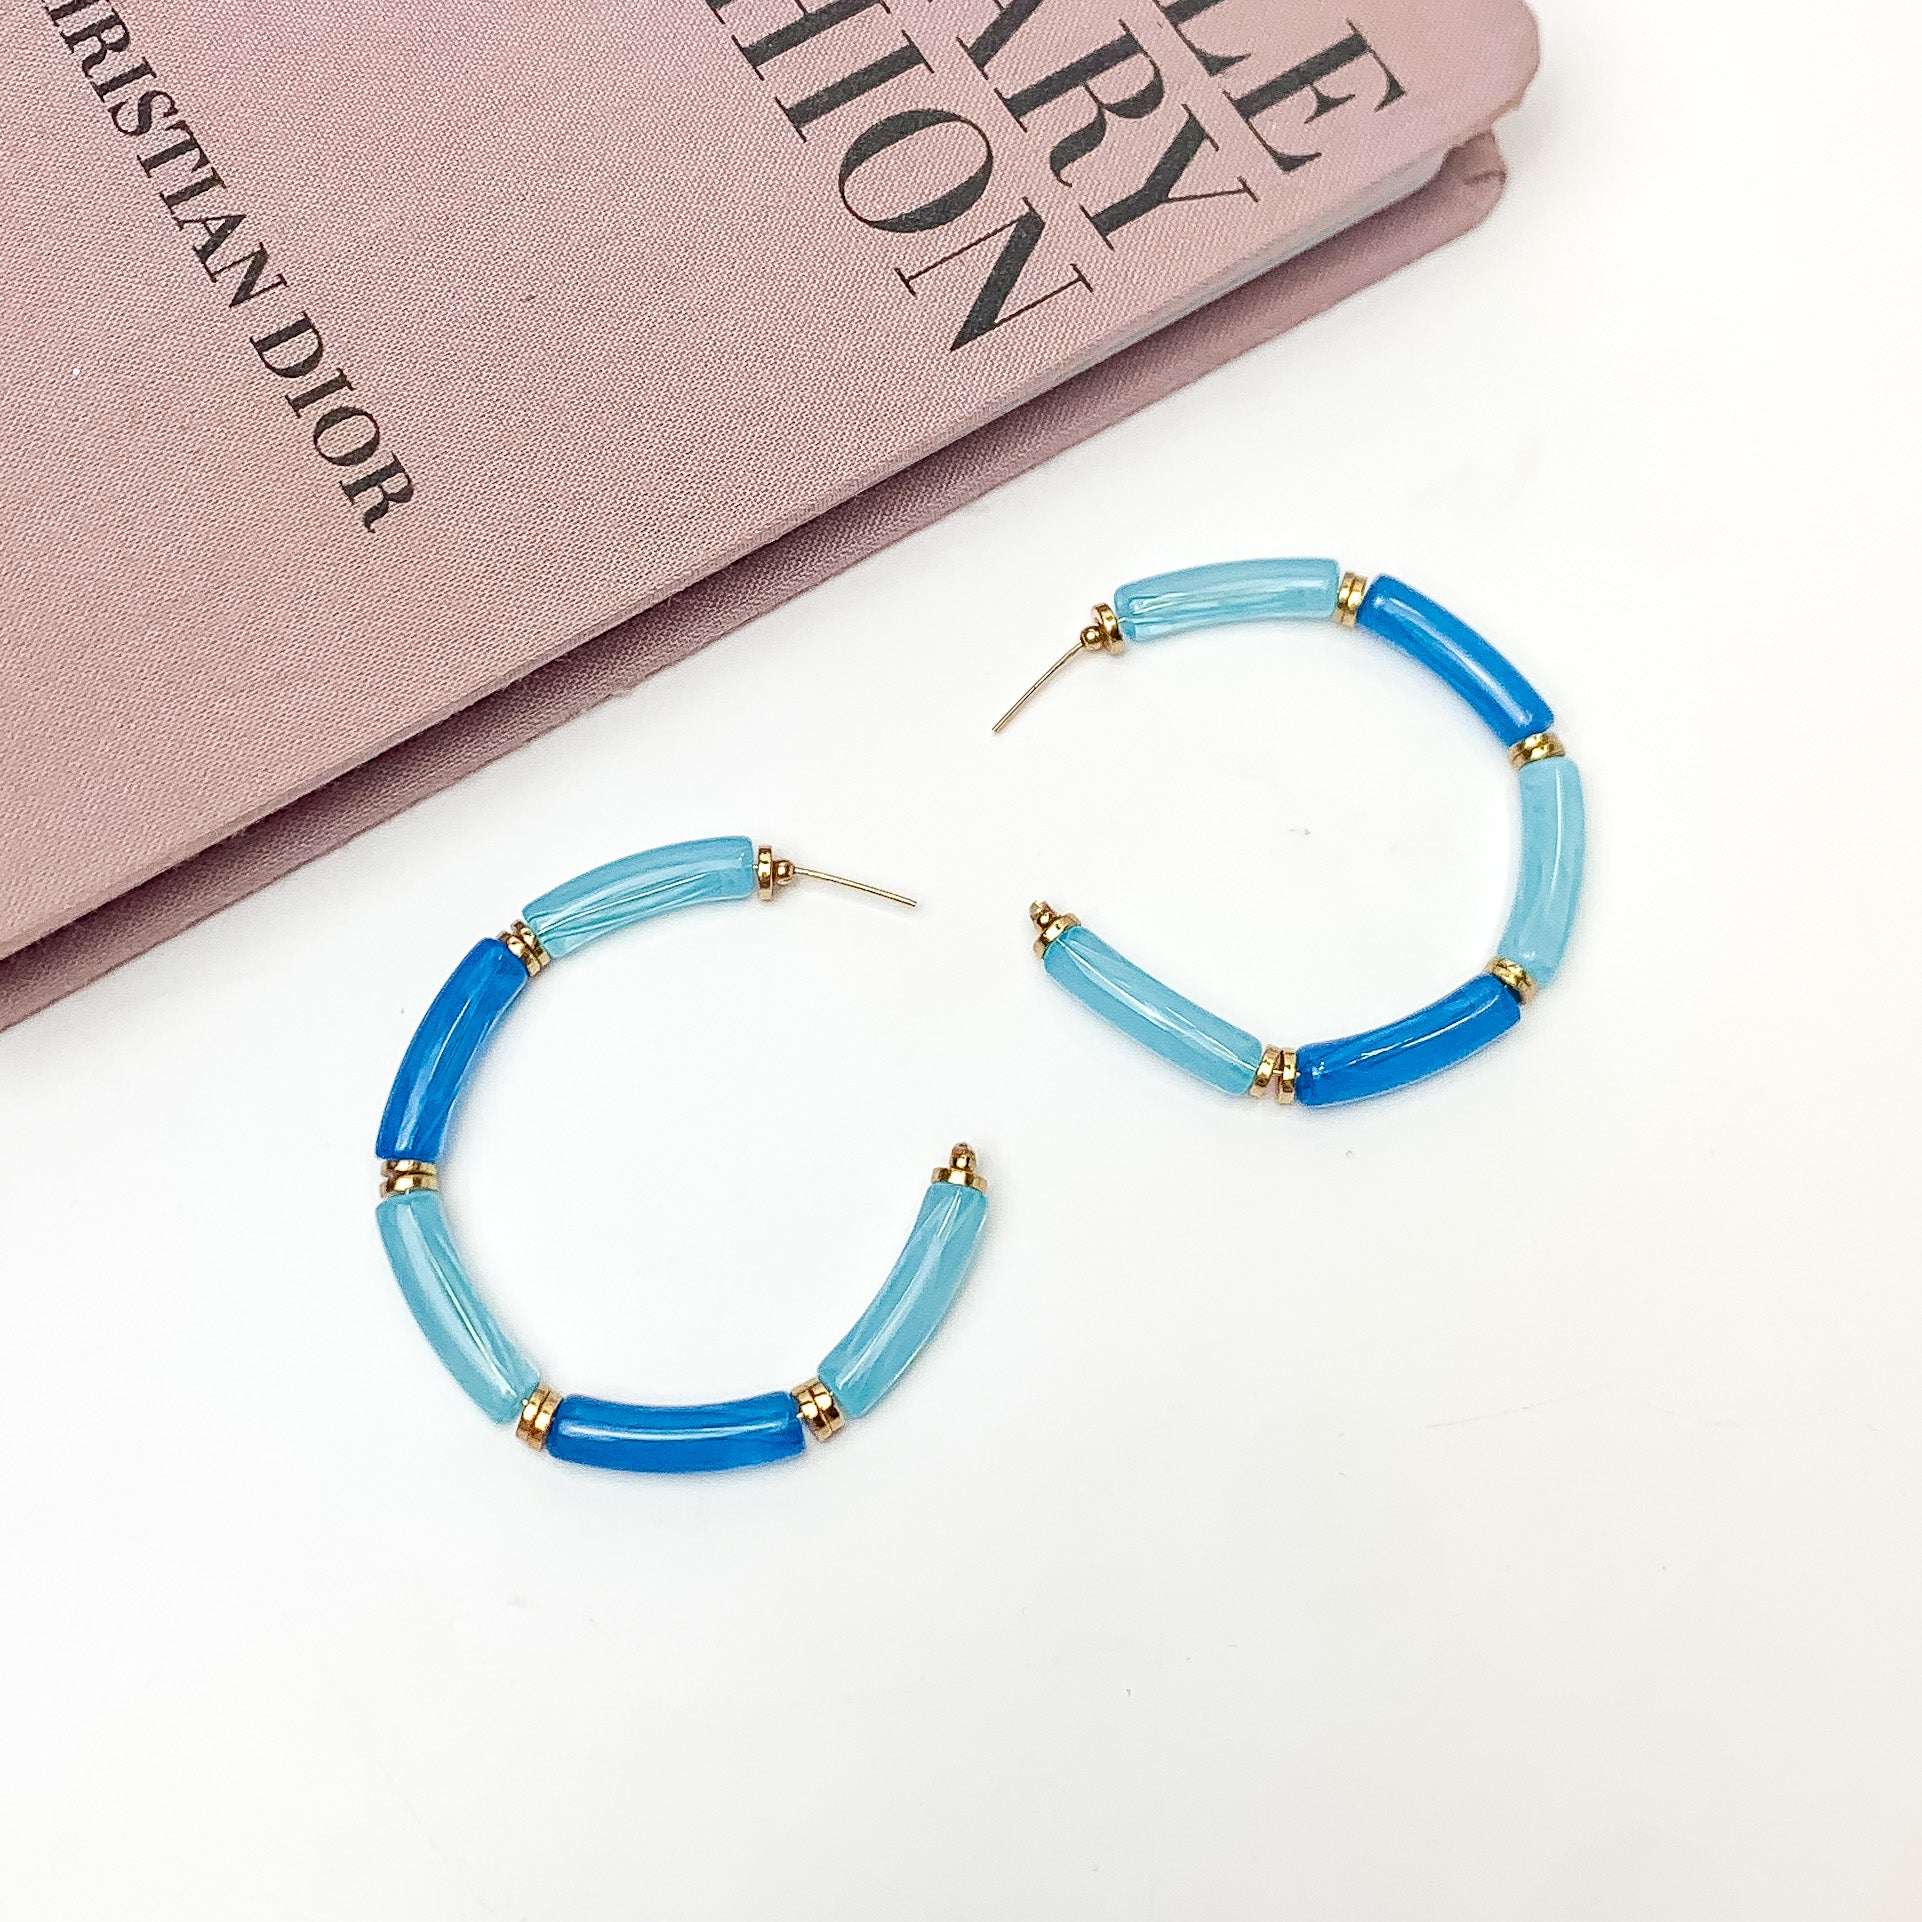 Island Style Tube Beaded Hoop Earrings Blue. Pictured on a white background with a book in the top left corner.